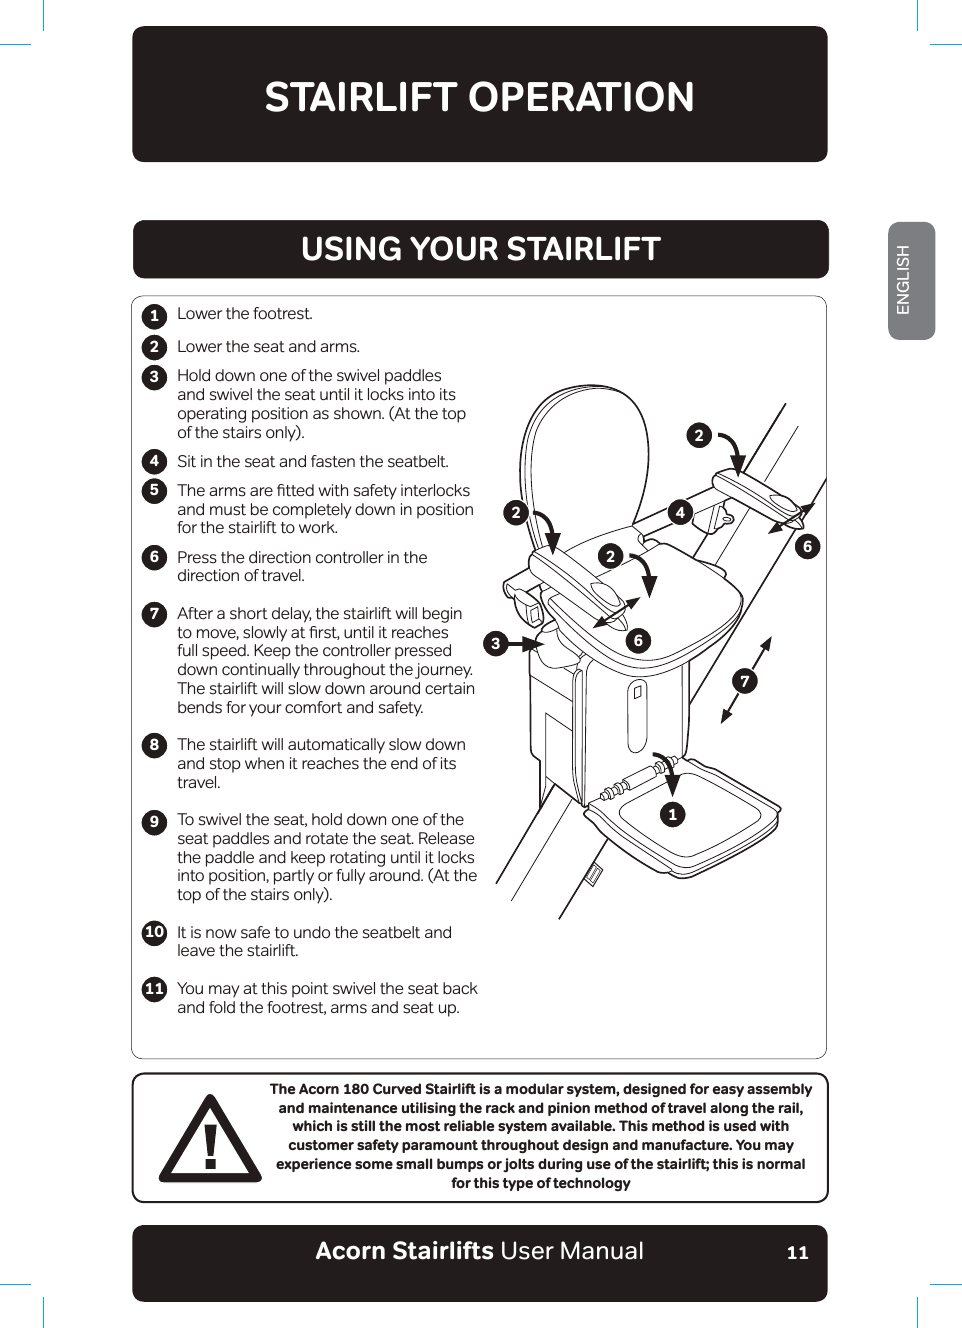 Acorn Stairlifts User ManualENGLISH11STAIRLIFT OPERATION123456789The Acorn 180 Curved Stairlift is a modular system, designed for easy assembly and maintenance utilising the rack and pinion method of travel along the rail, which is still the most reliable system available. This method is used with customer safety paramount throughout design and manufacture. You may experience some small bumps or jolts during use of the stairlift; this is normal for this type of technologyLower the footrest.Lower the seat and arms.Hold down one of the swivel paddles and swivel the seat until it locks into its operating position as shown. (At the top of the stairs only).Sit in the seat and fasten the seatbelt.7KHDUPVDUHƷWWHGZLWKVDIHW\LQWHUORFNVand must be completely down in position for the stairlift to work.Press the direction controller in the direction of travel.After a short delay, the stairlift will begin WRPRYHVORZO\DWƷUVWXQWLOLWUHDFKHVfull speed. Keep the controller pressed down continually throughout the journey. The stairlift will slow down around certain bends for your comfort and safety.The stairlift will automatically slow down and stop when it reaches the end of its travel.To swivel the seat, hold down one of the seat paddles and rotate the seat. Release the paddle and keep rotating until it locks into position, partly or fully around. (At the top of the stairs only).It is now safe to undo the seatbelt and leave the stairlift.You may at this point swivel the seat back and fold the footrest, arms and seat up.1011USING YOUR STAIRLIFT122346672